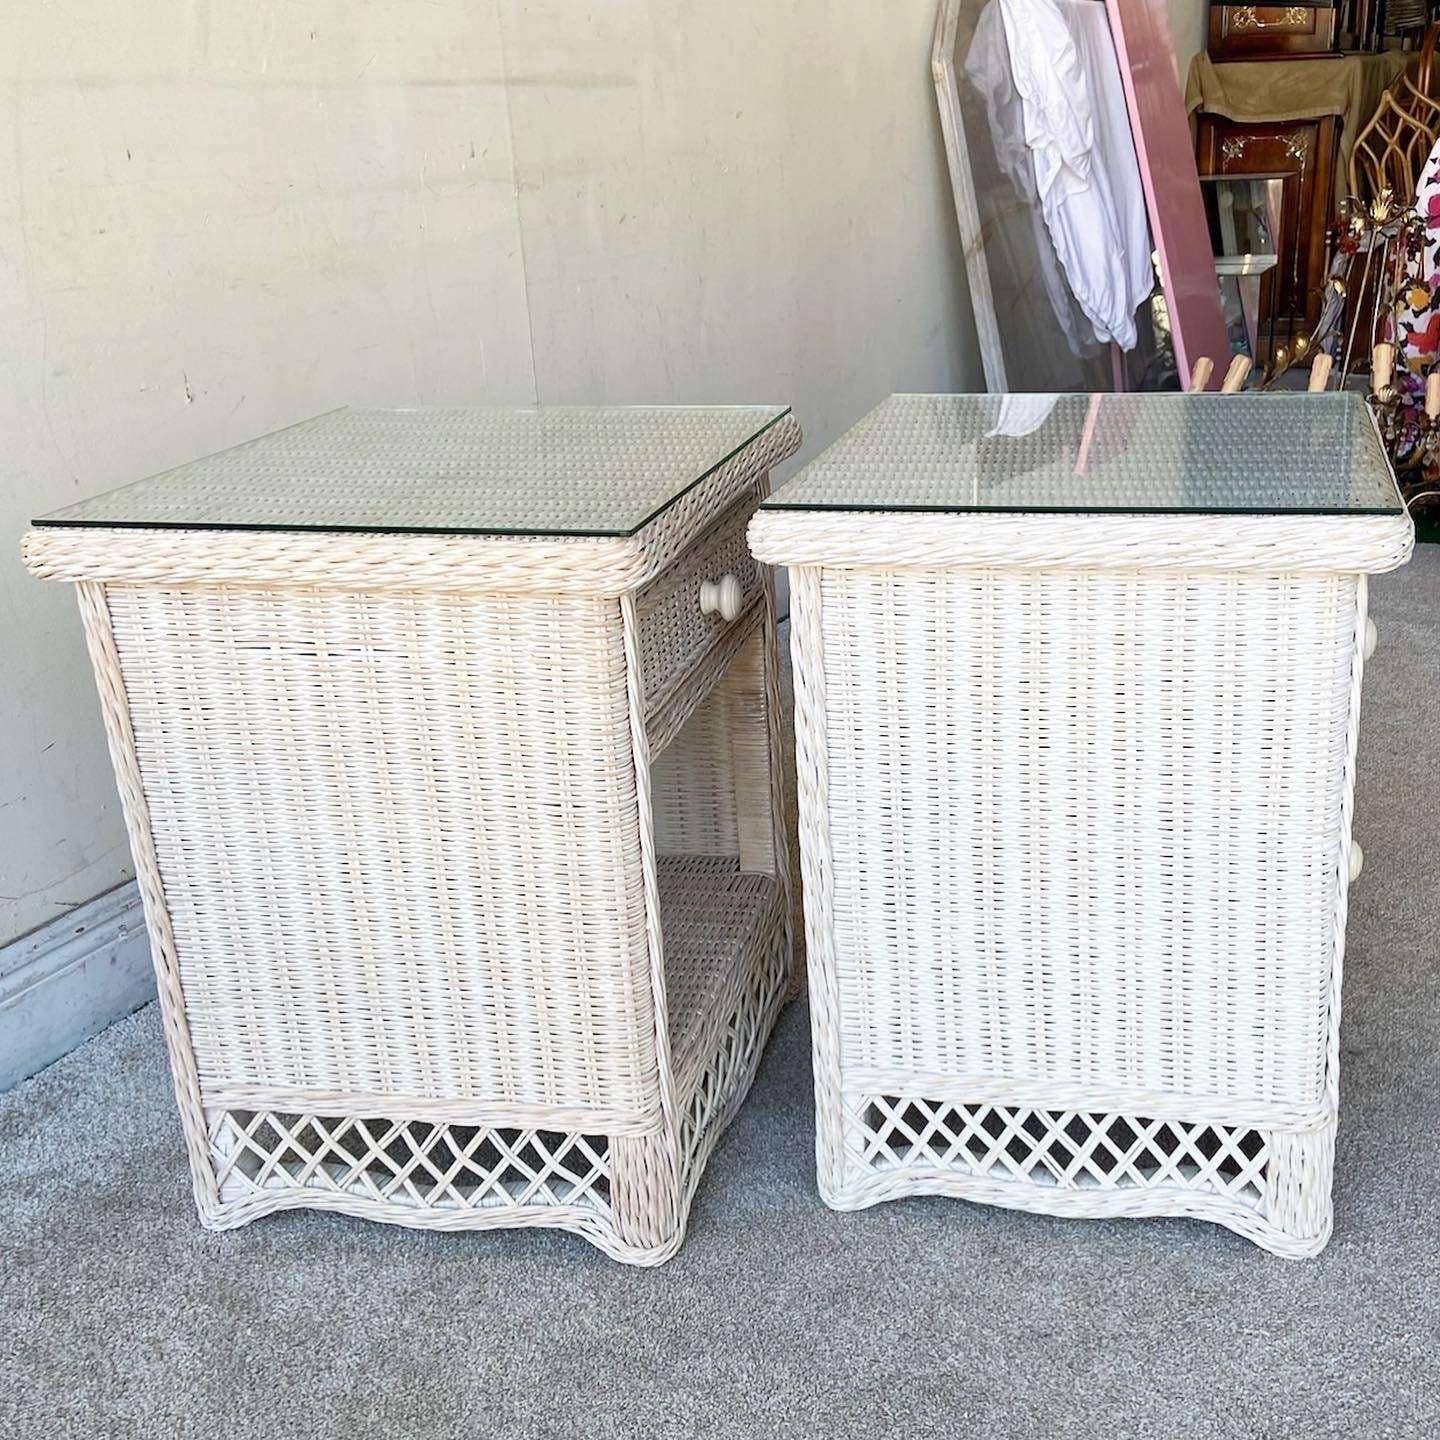 Incredible pair of vintage bohemian nighstands with glass tops. Each feature a washed white wicker throughout.